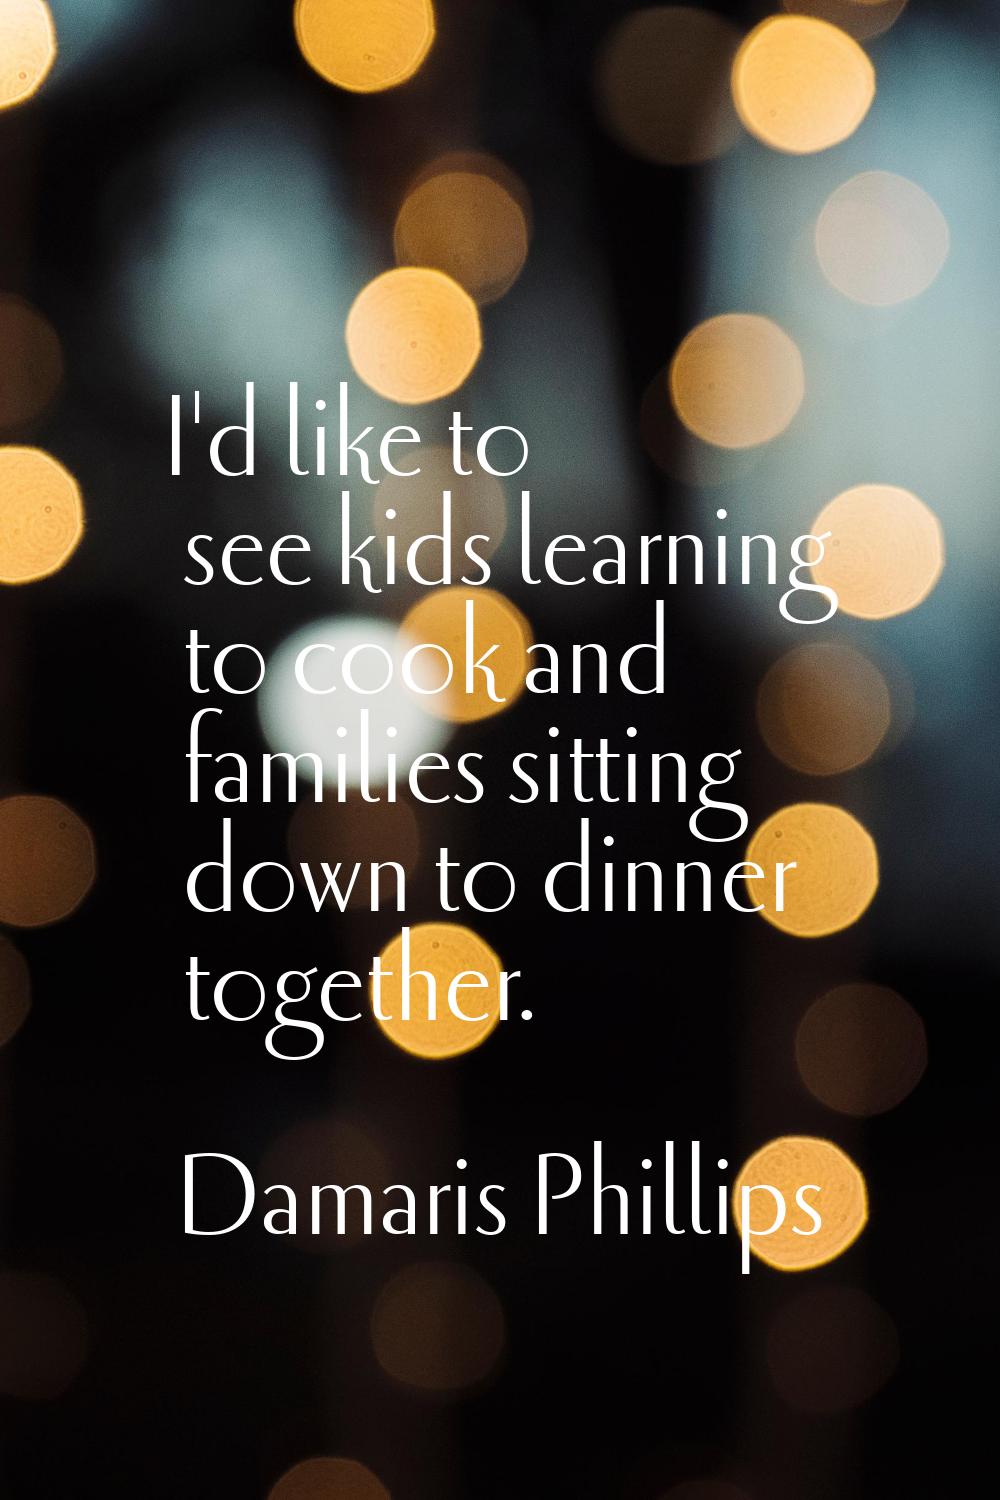 I'd like to see kids learning to cook and families sitting down to dinner together.